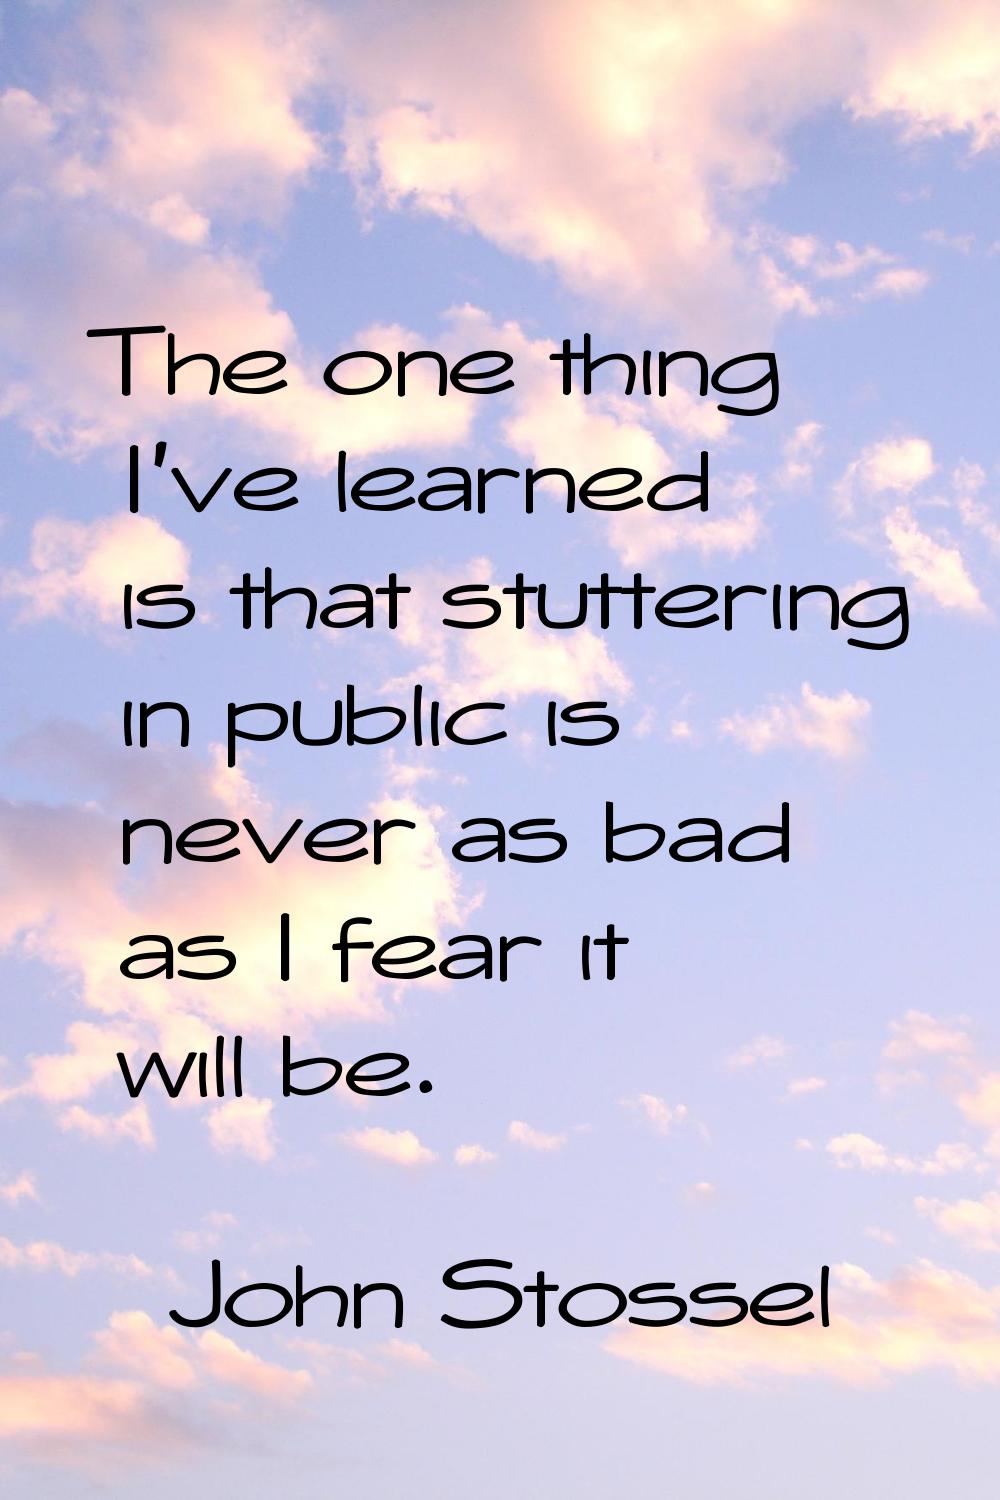 The one thing I've learned is that stuttering in public is never as bad as I fear it will be.